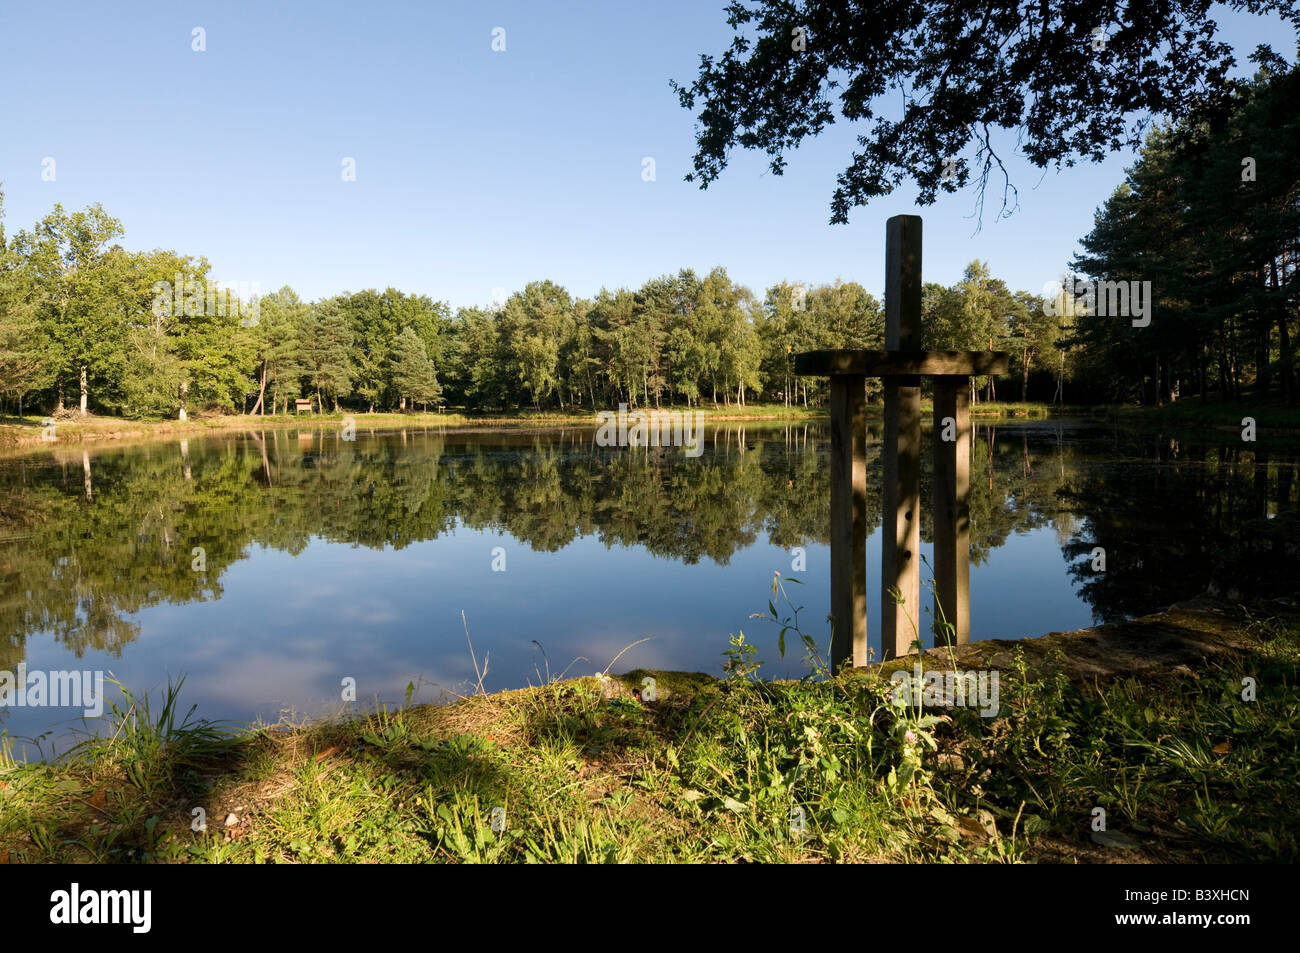 Lake and picnic area, Foret de Preuilly, sud-Touraine, France. Stock Photo